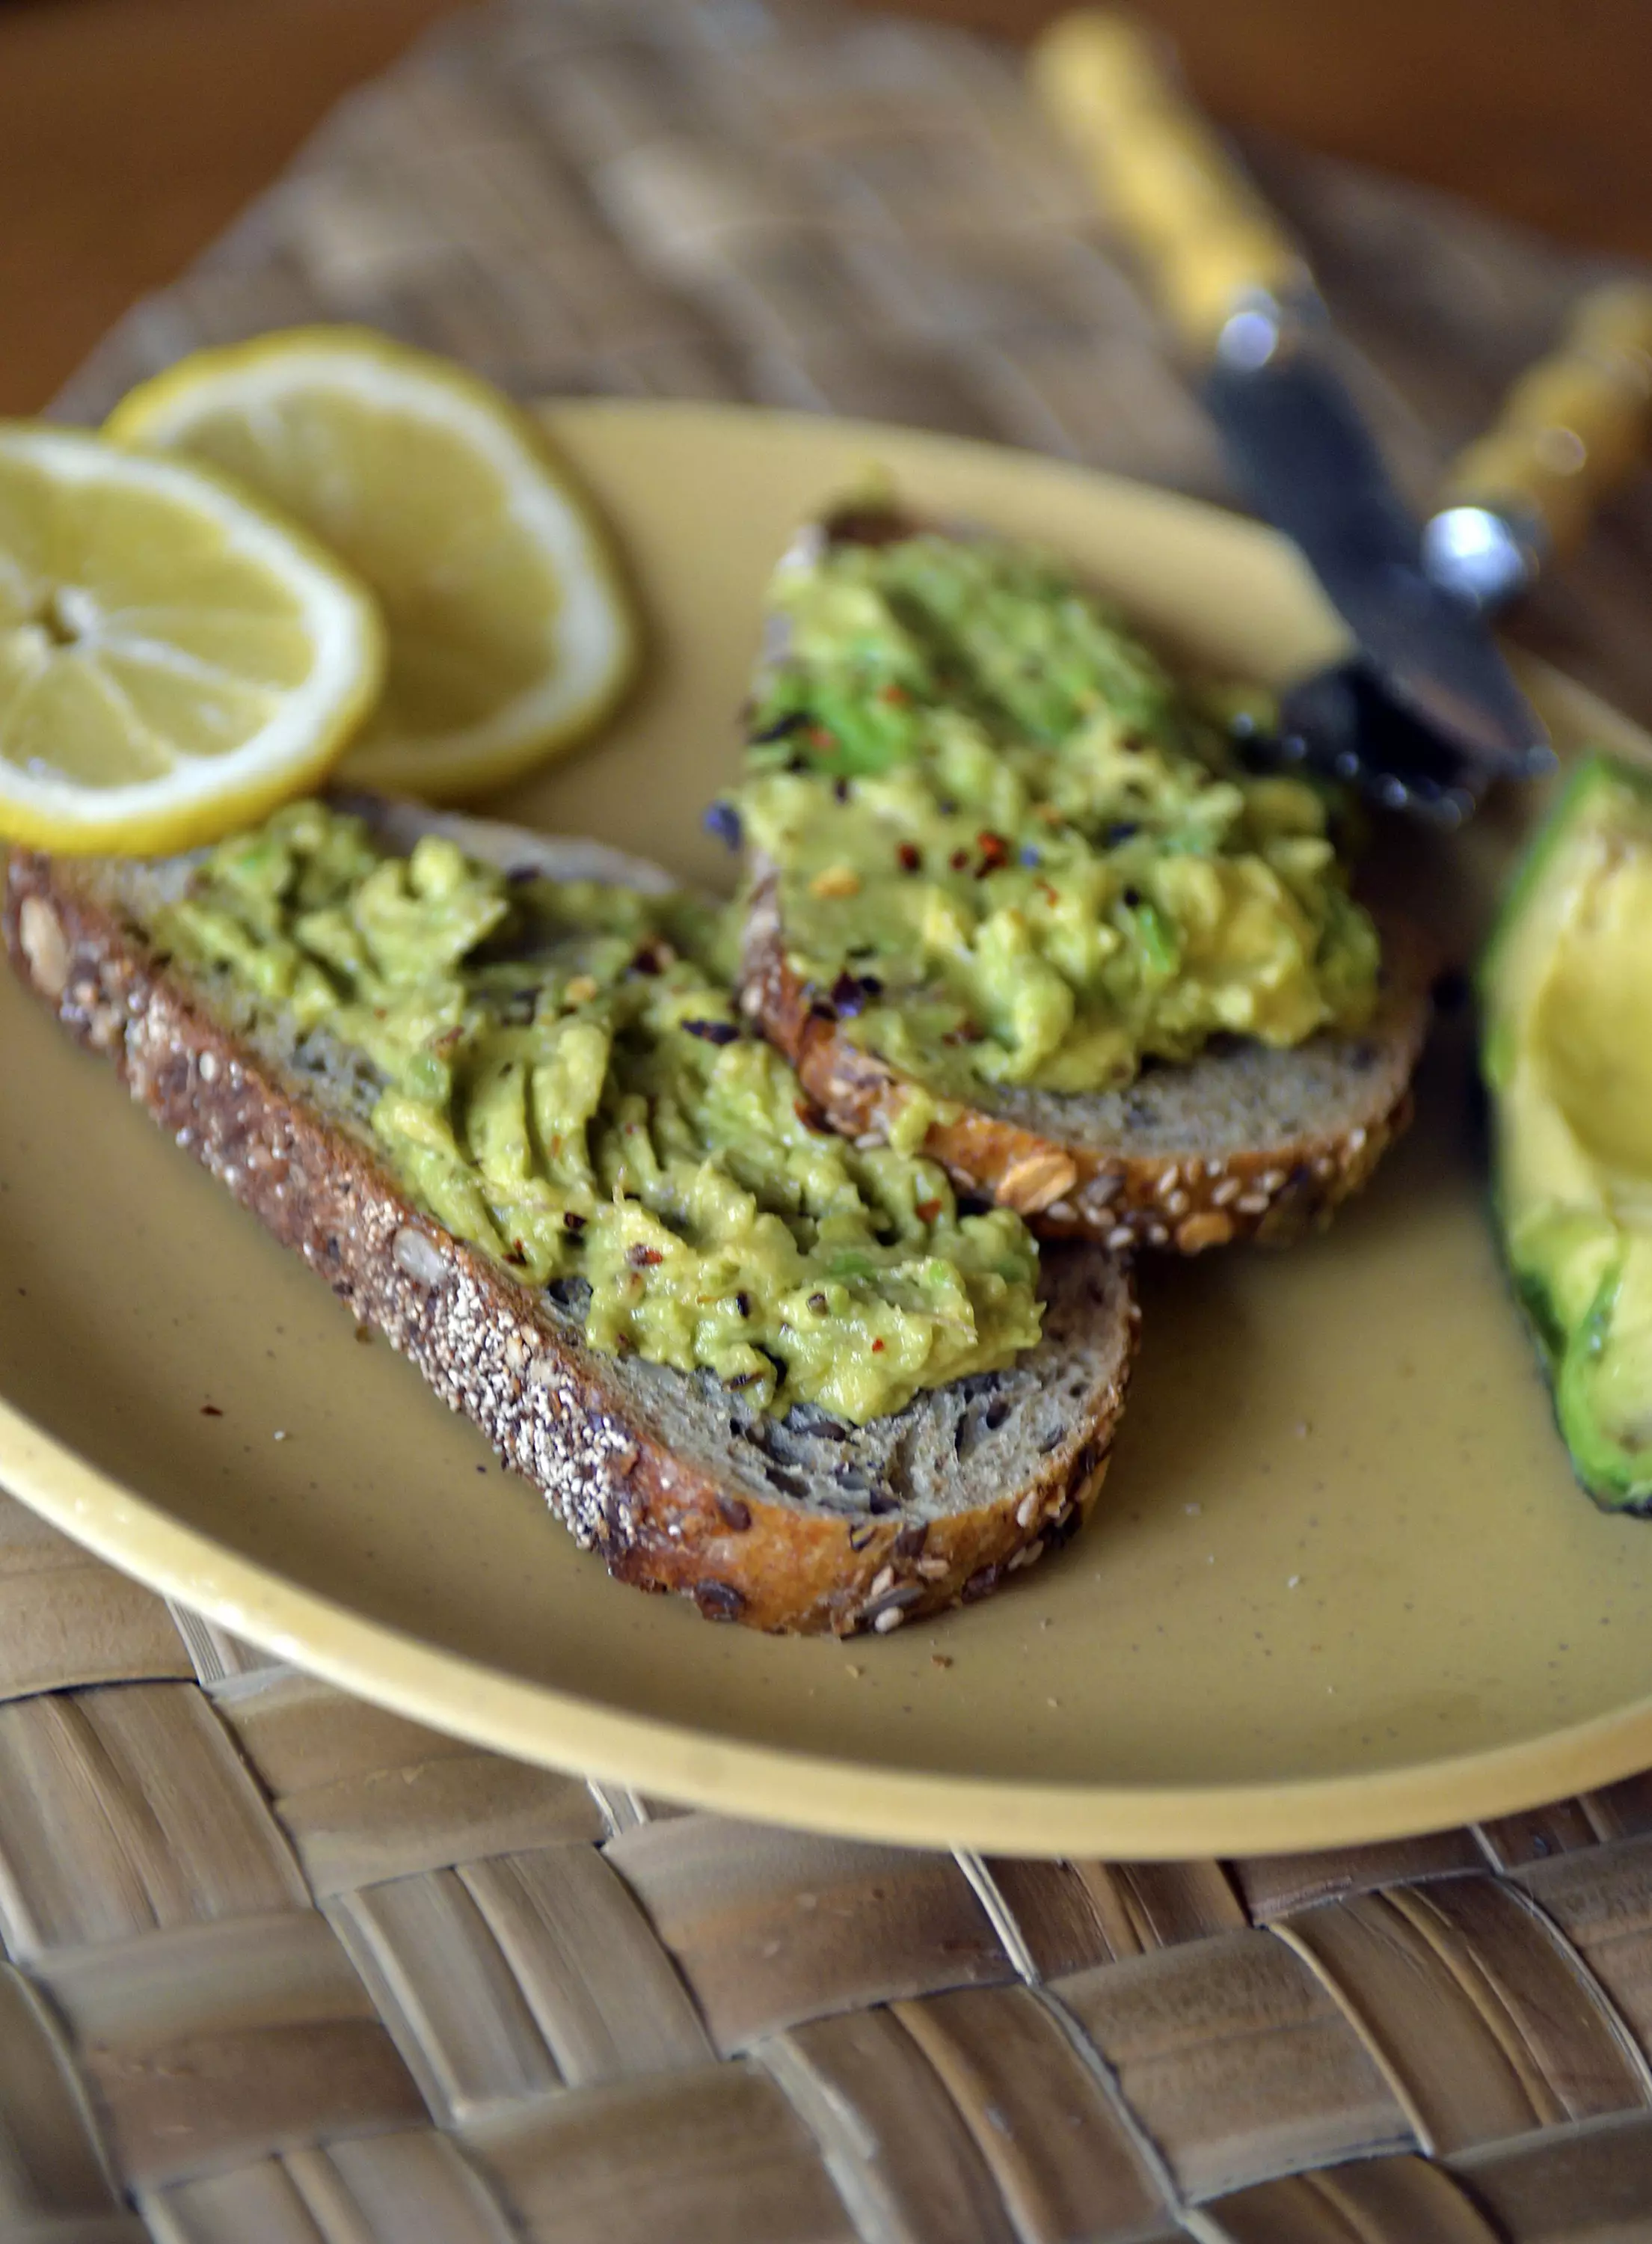 Avocado on toast, the dish synonymous with millennials.